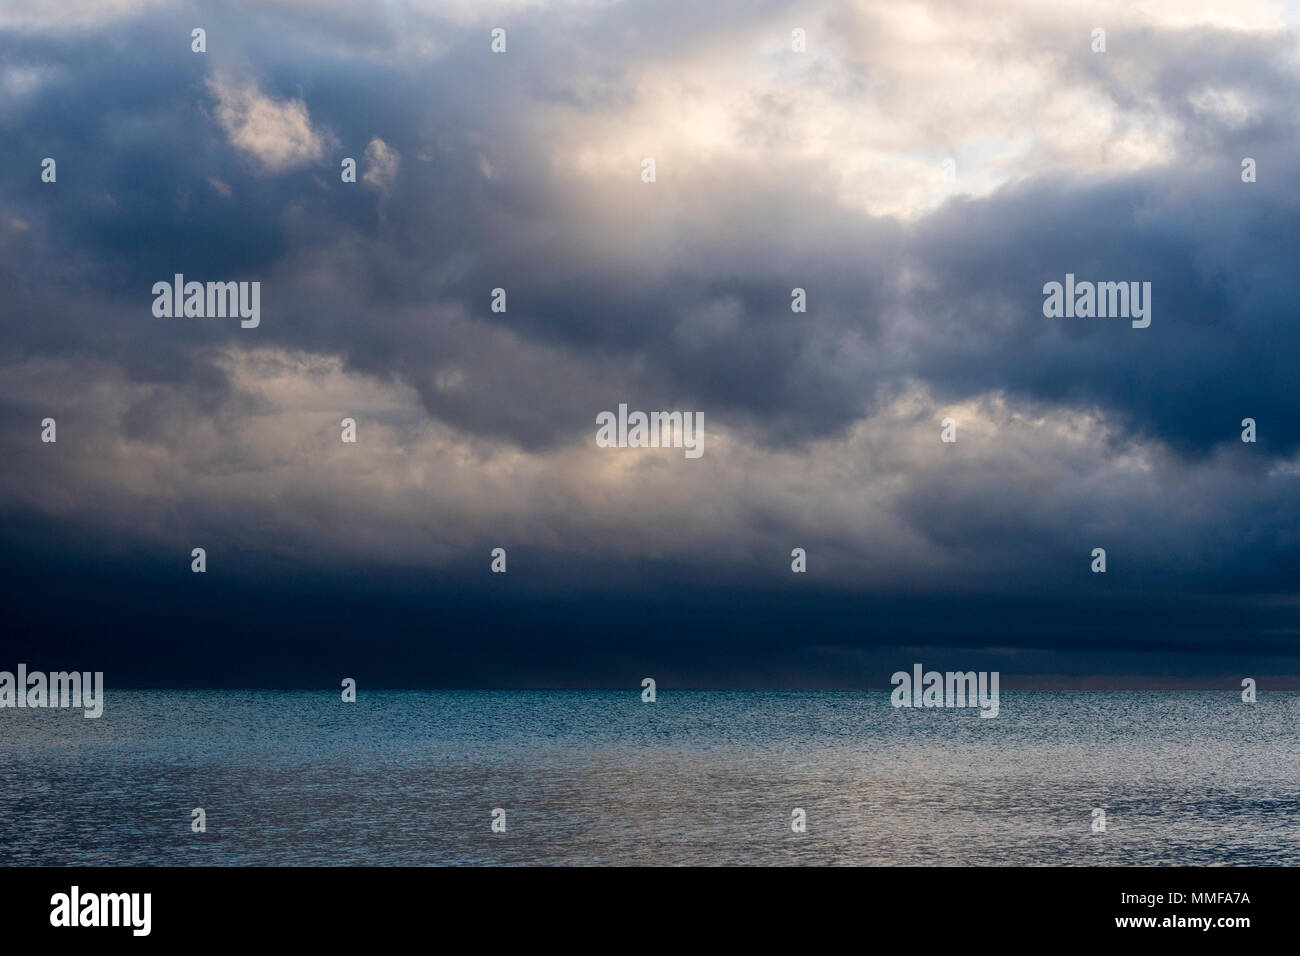 Storm clouds reflected in a calm tropical ocean at dawn. Stock Photo